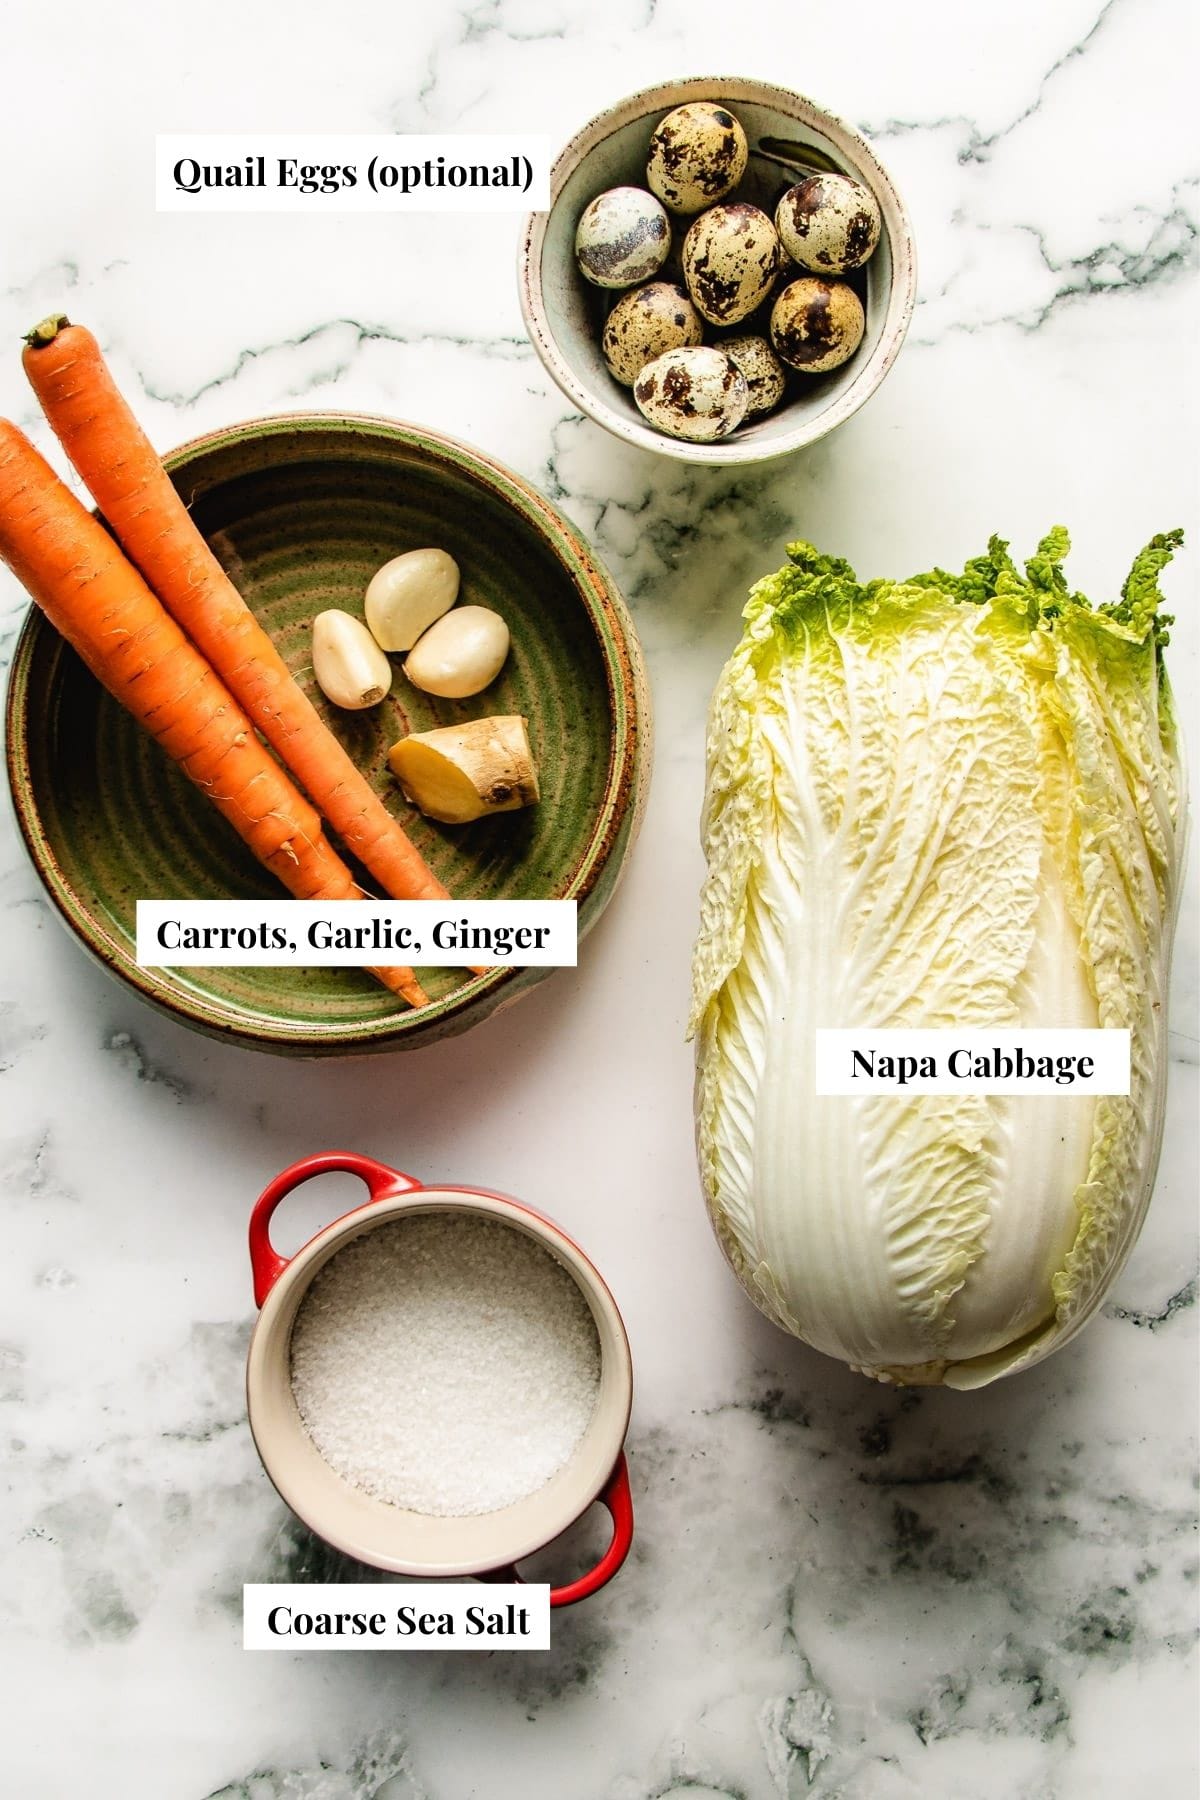 Ingredients to make the stir-fry with napa cabbage, quail eggs, carrots, ginger, garlic, and salt.